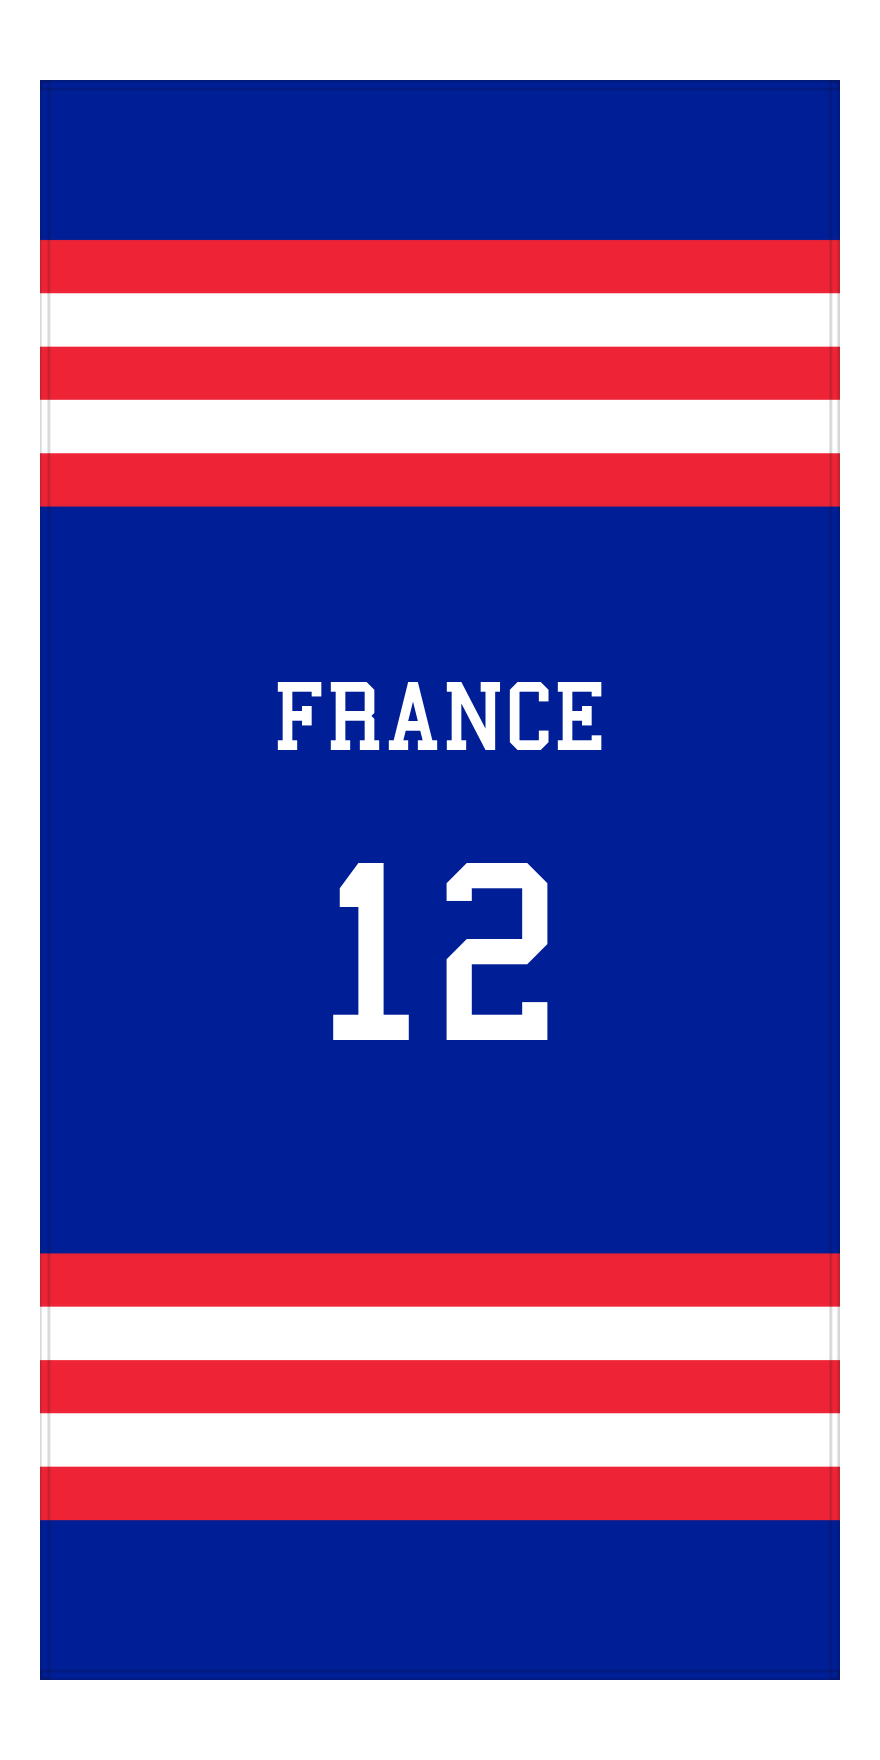 Personalized Jersey Number 2-on-1 Stripes Sports Beach Towel - France - Vertical Design - Front View